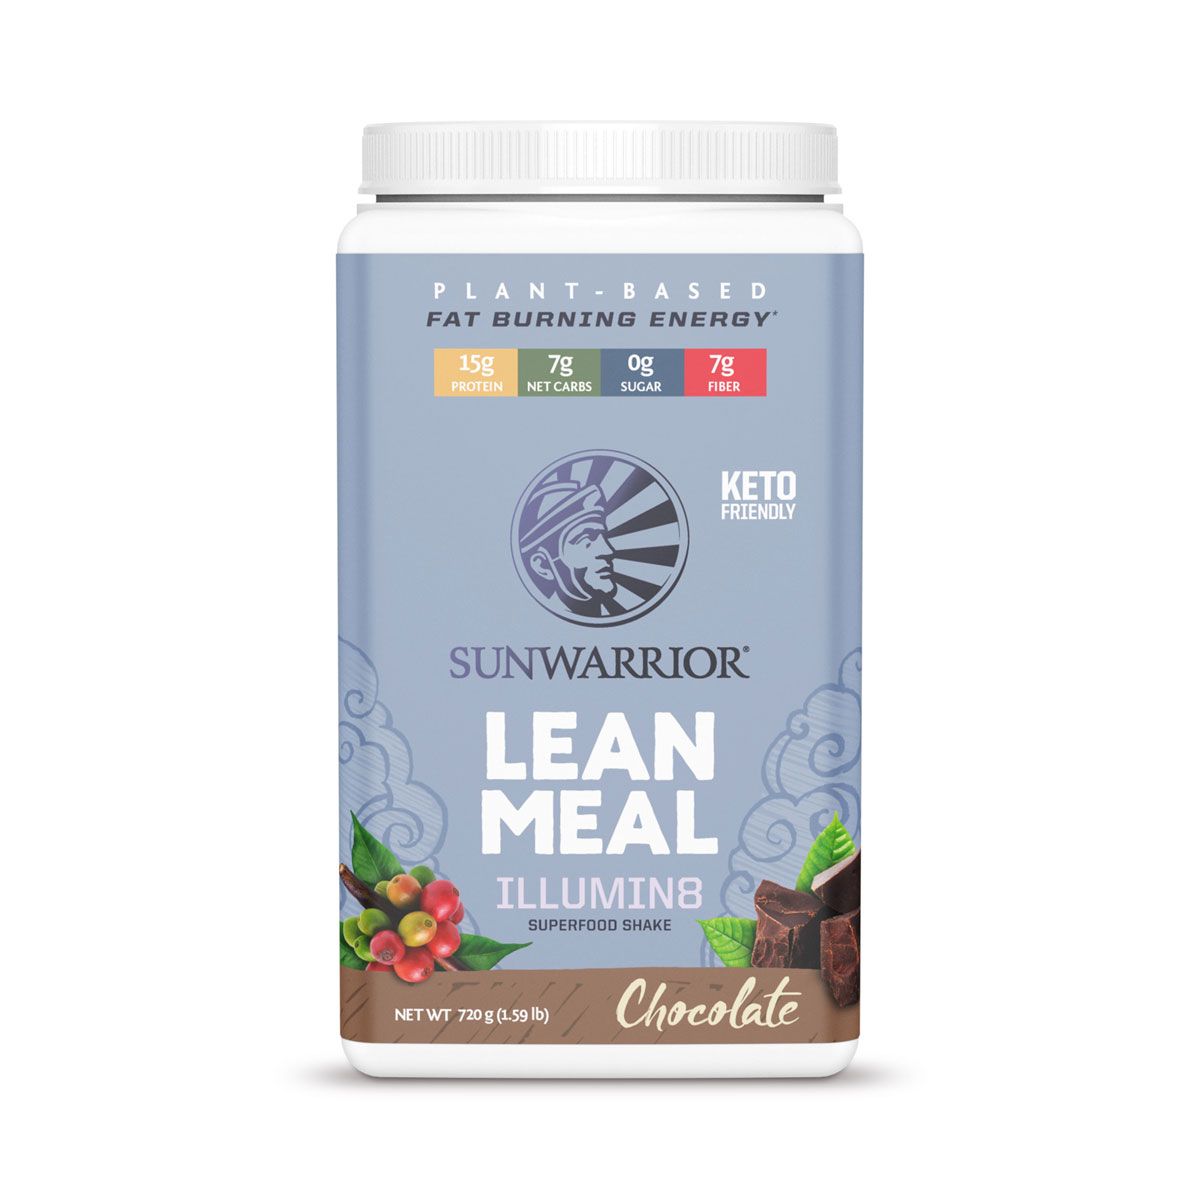 Sunwarrior Lean Meal Illumin8 Organic Vegan Superfood Meal Replacement with Probiotics - Chocolate 720g